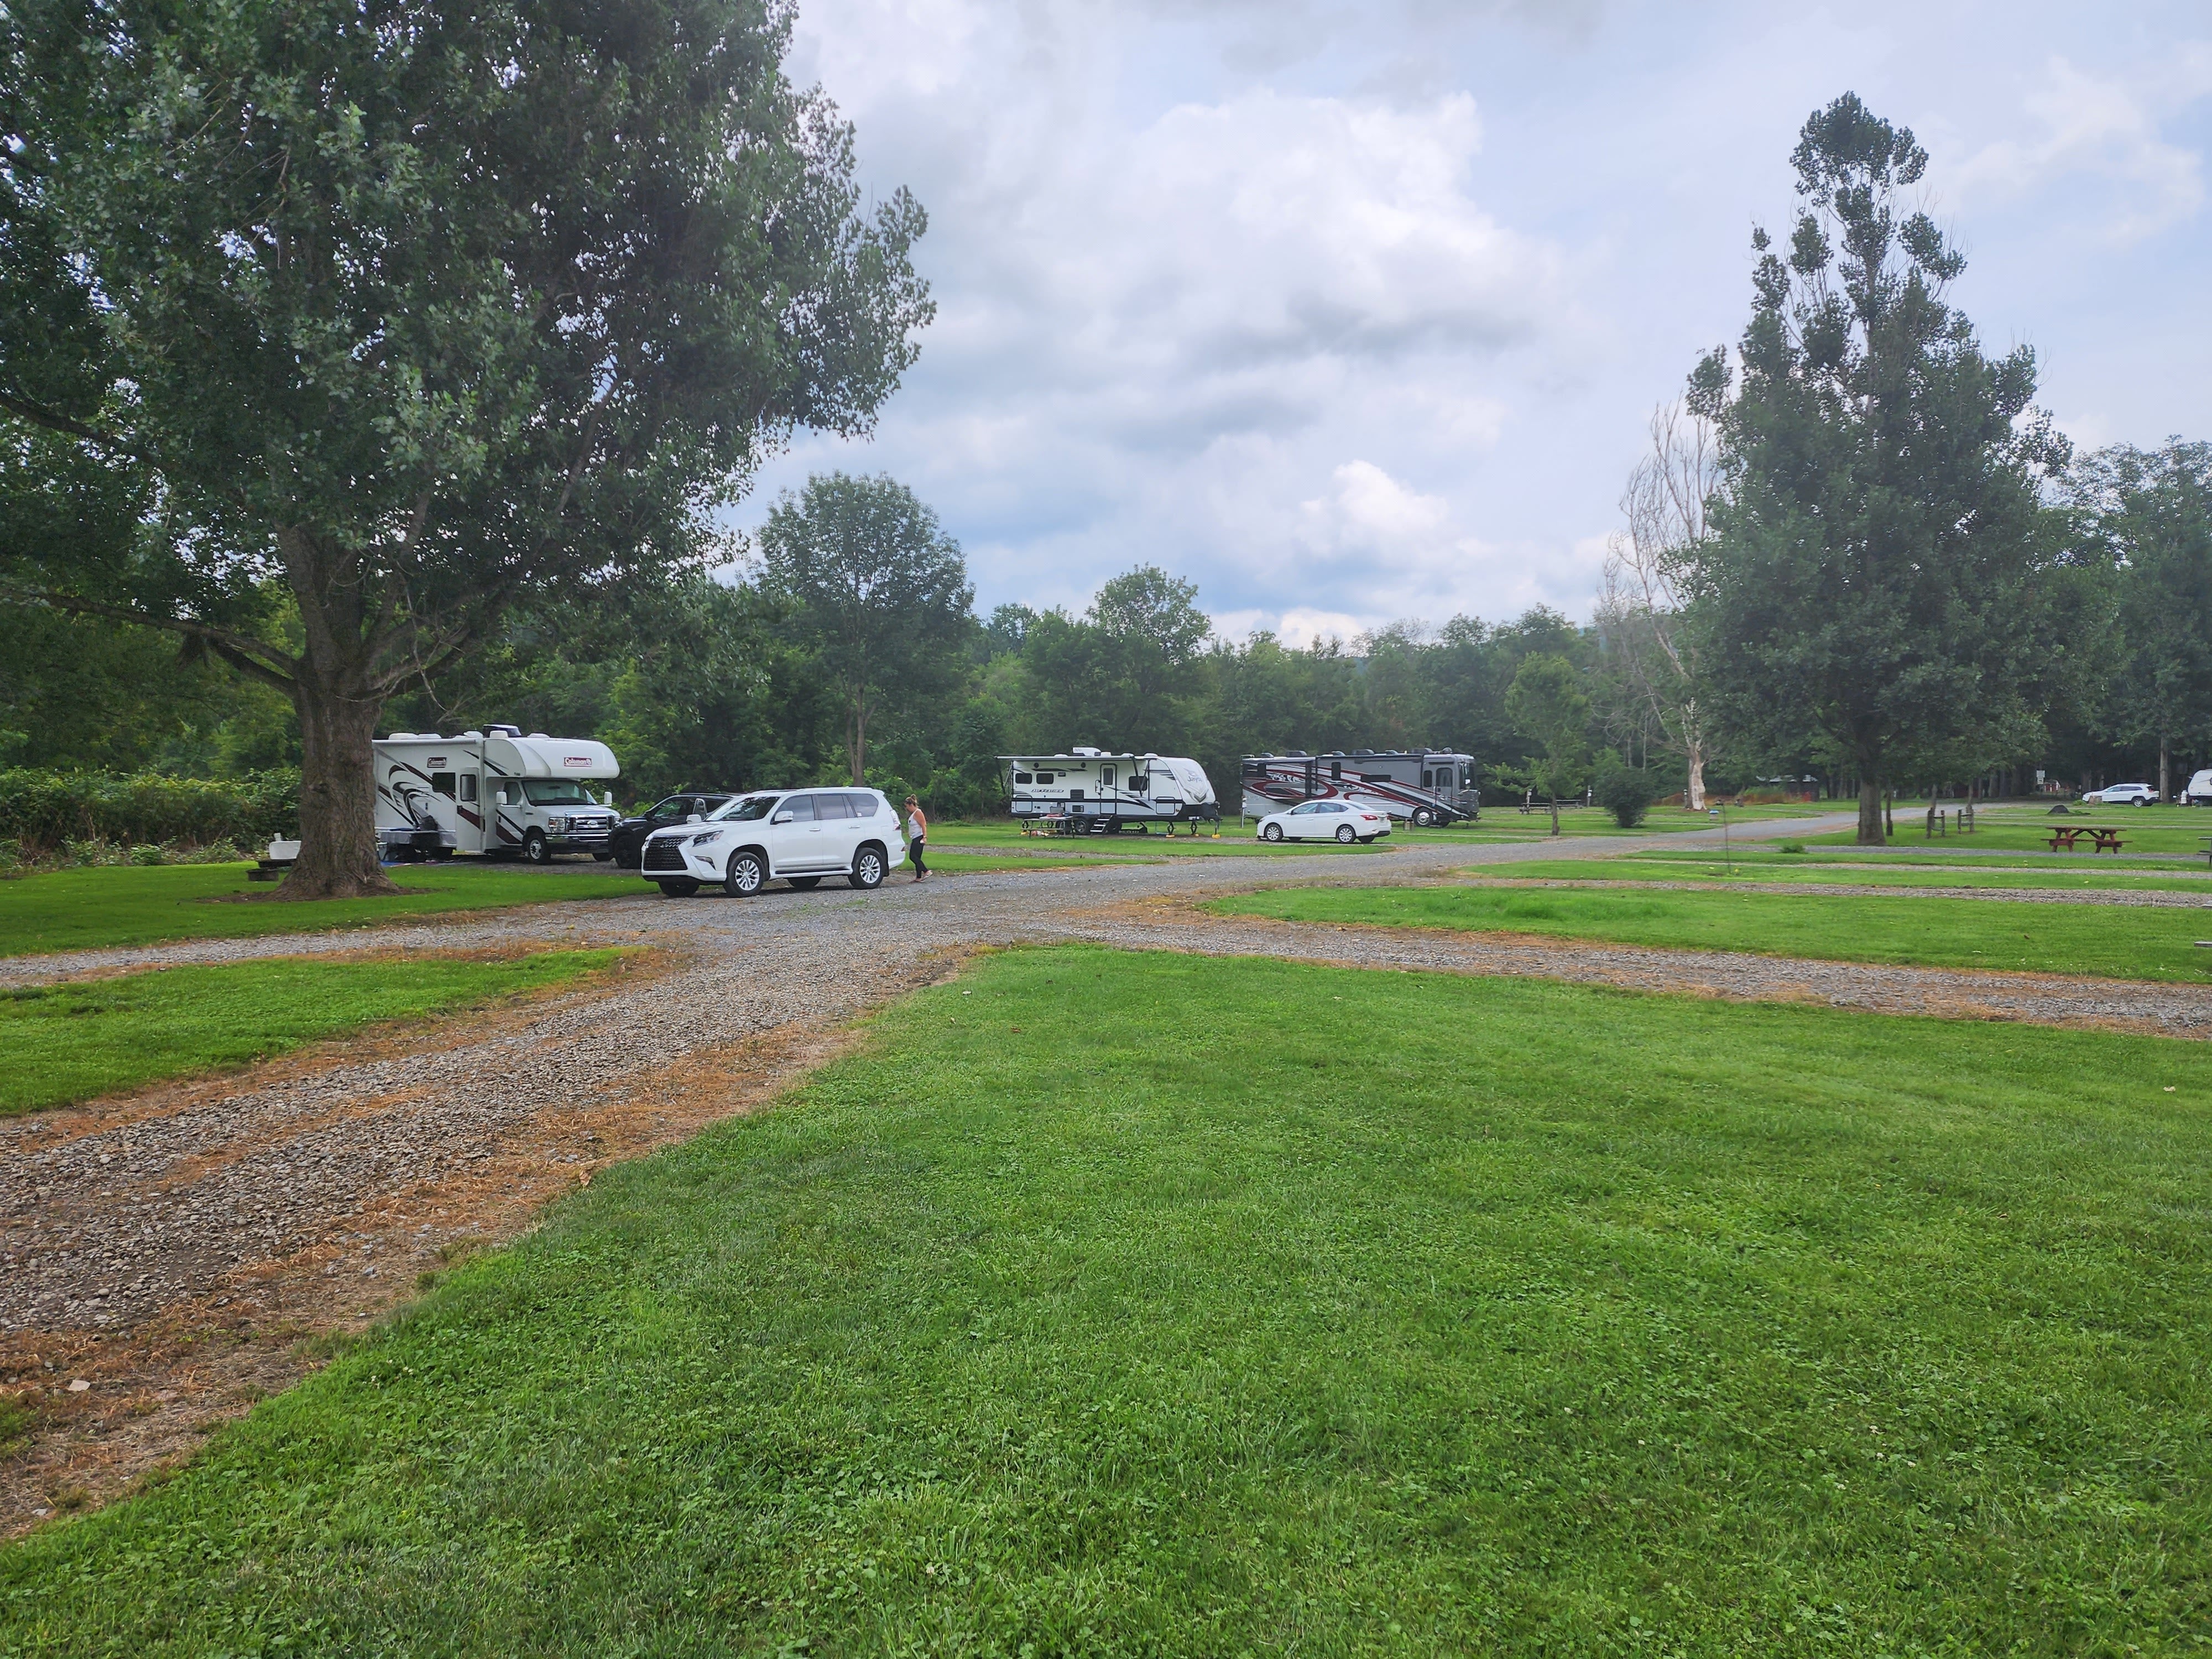 Camper submitted image from Susquehanna Trail Campground - 5